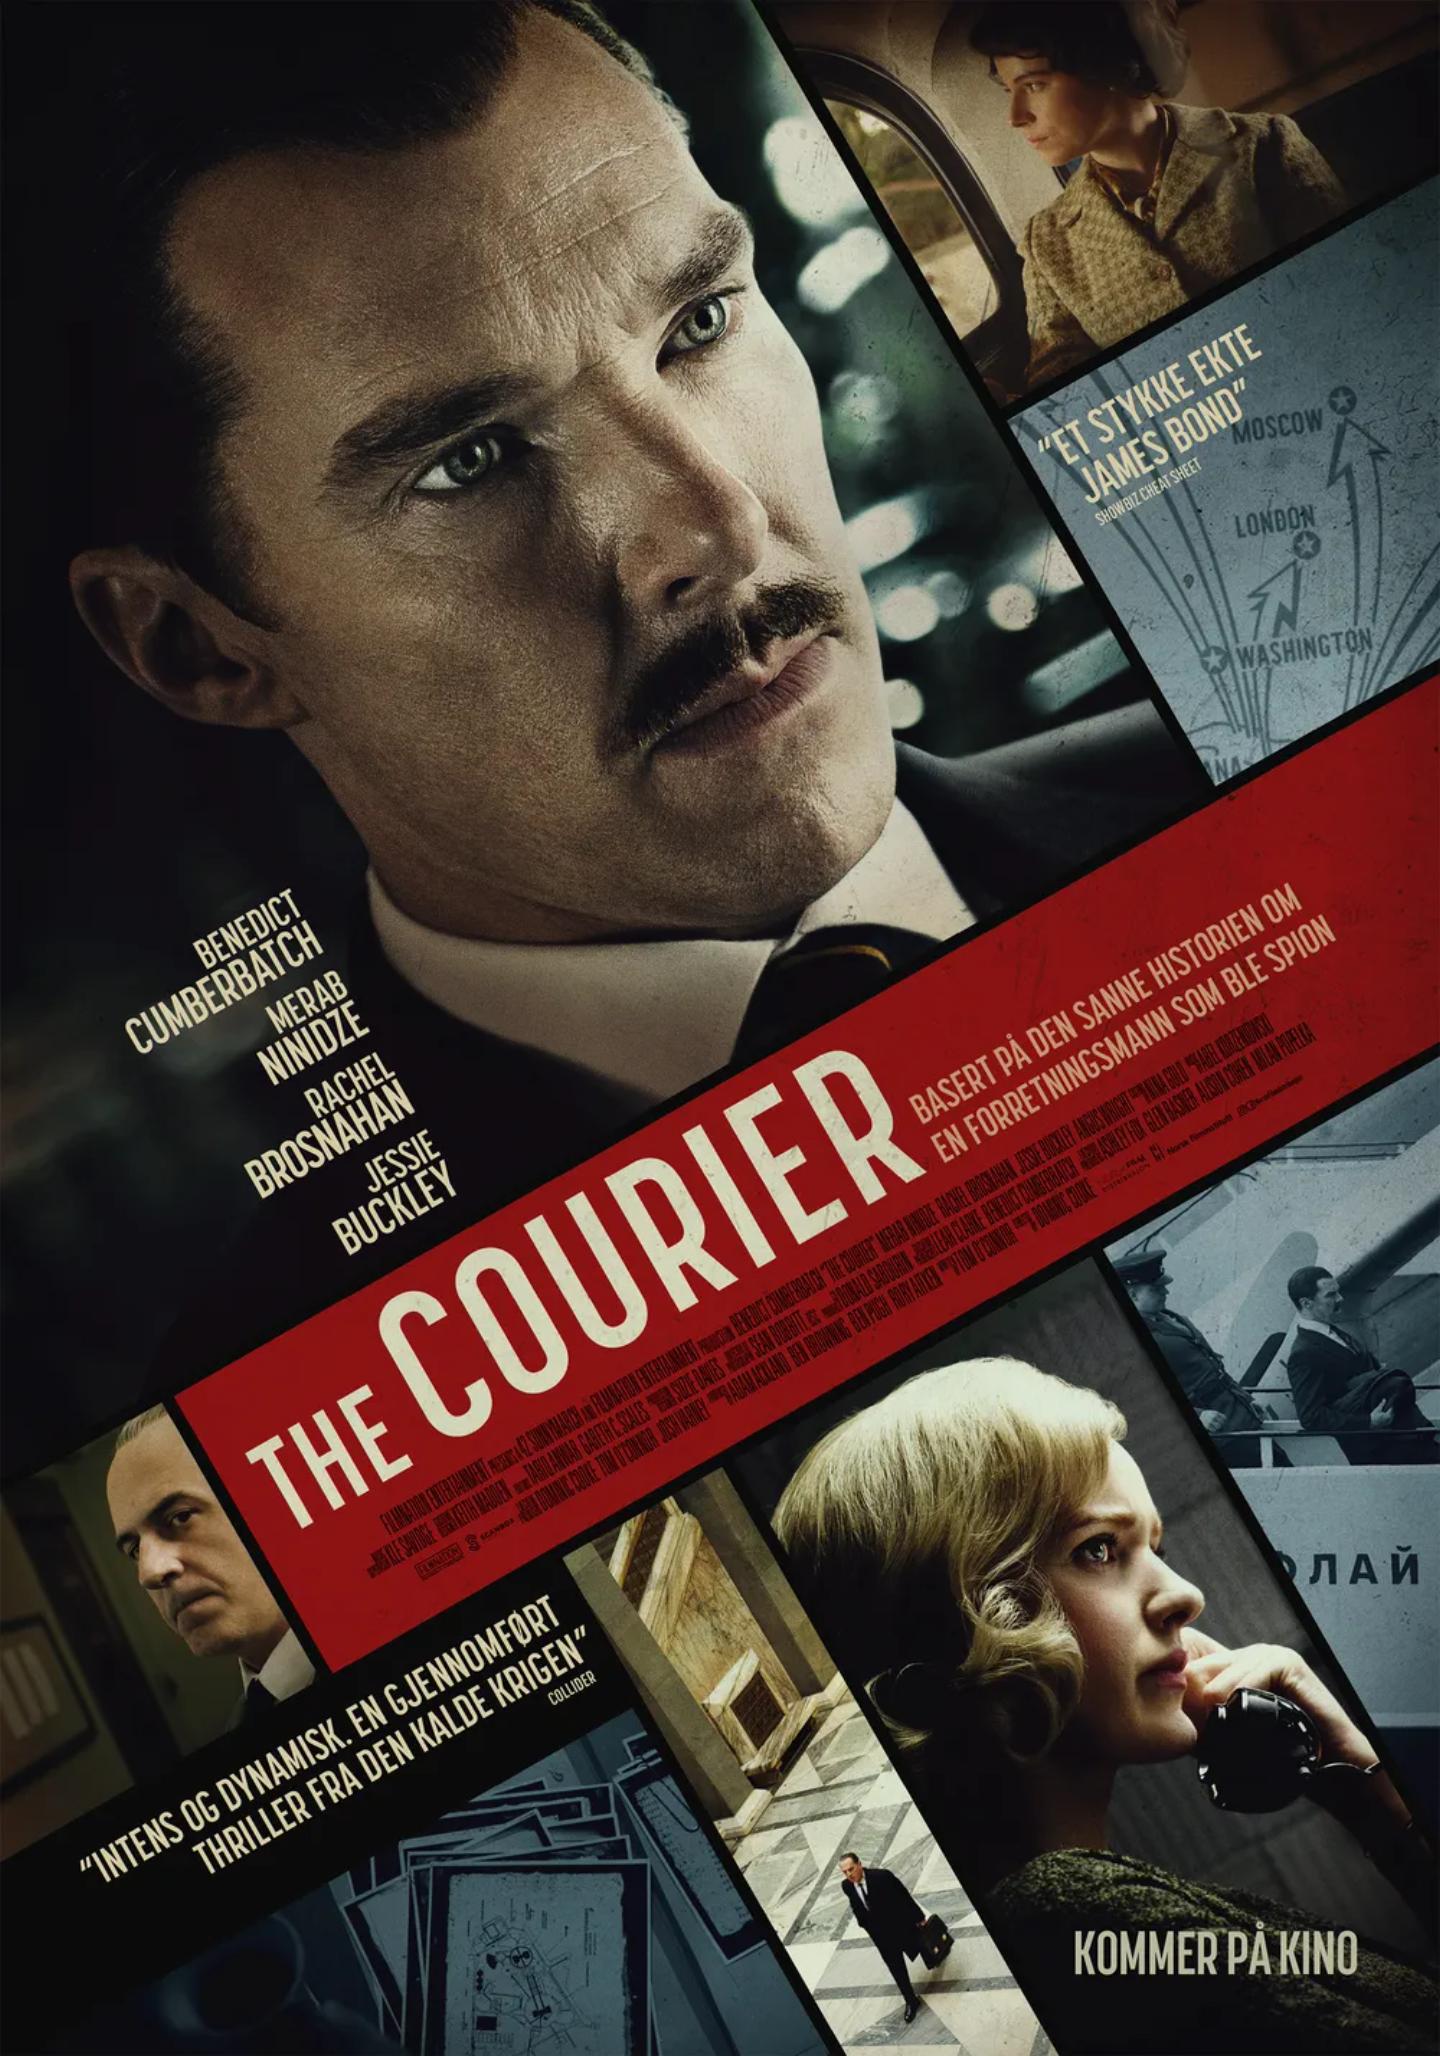 Plakat for 'The Courier'